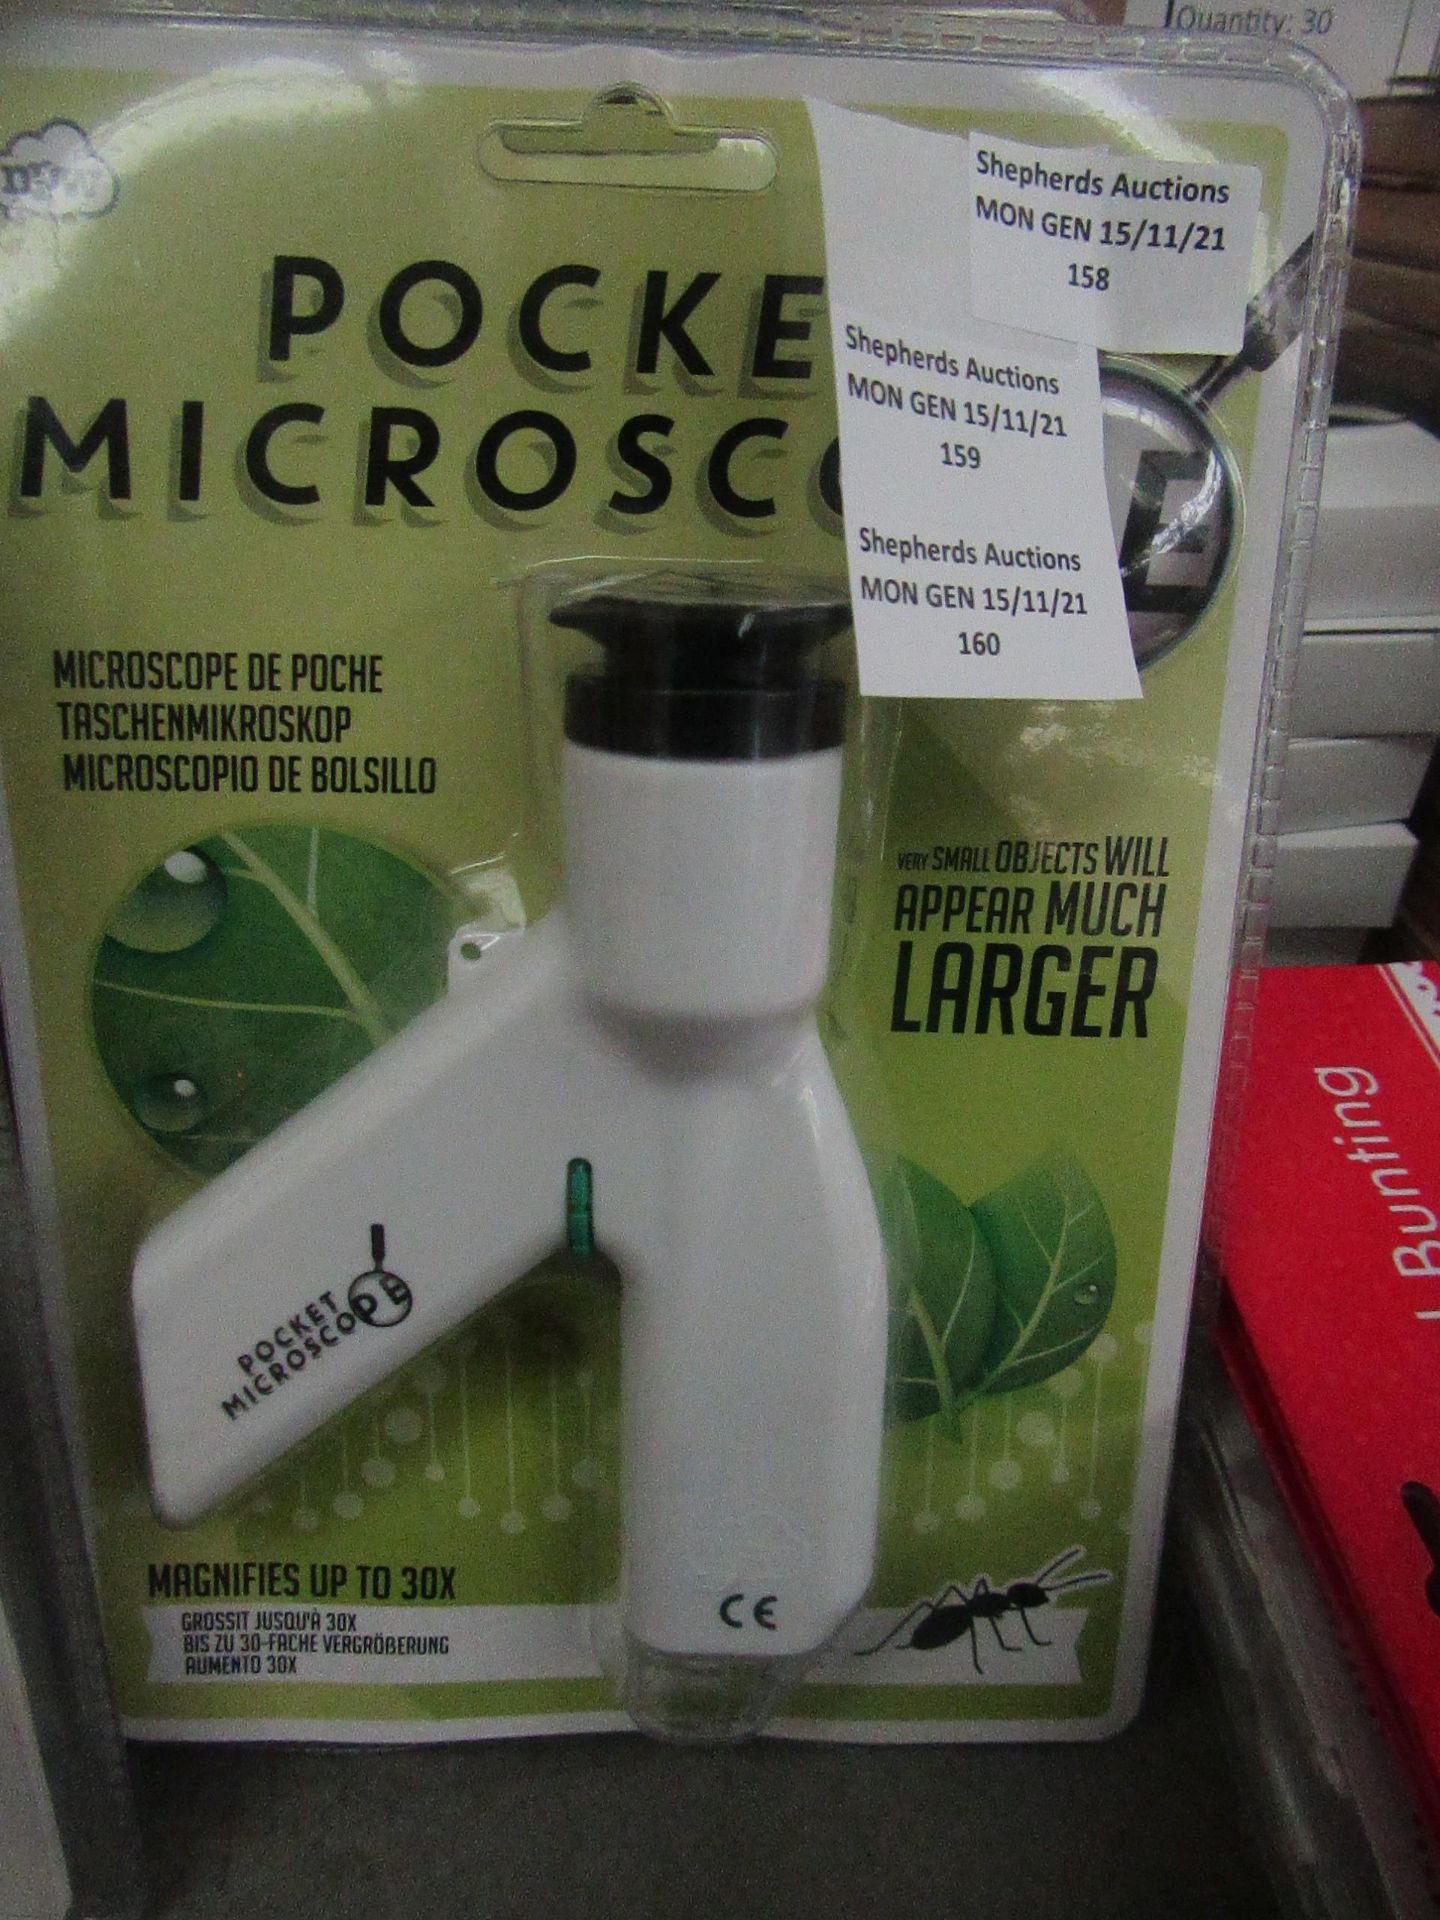 NPW - Pocket Microscope ( Magnifies Upto 30X ) - New & Packaged.